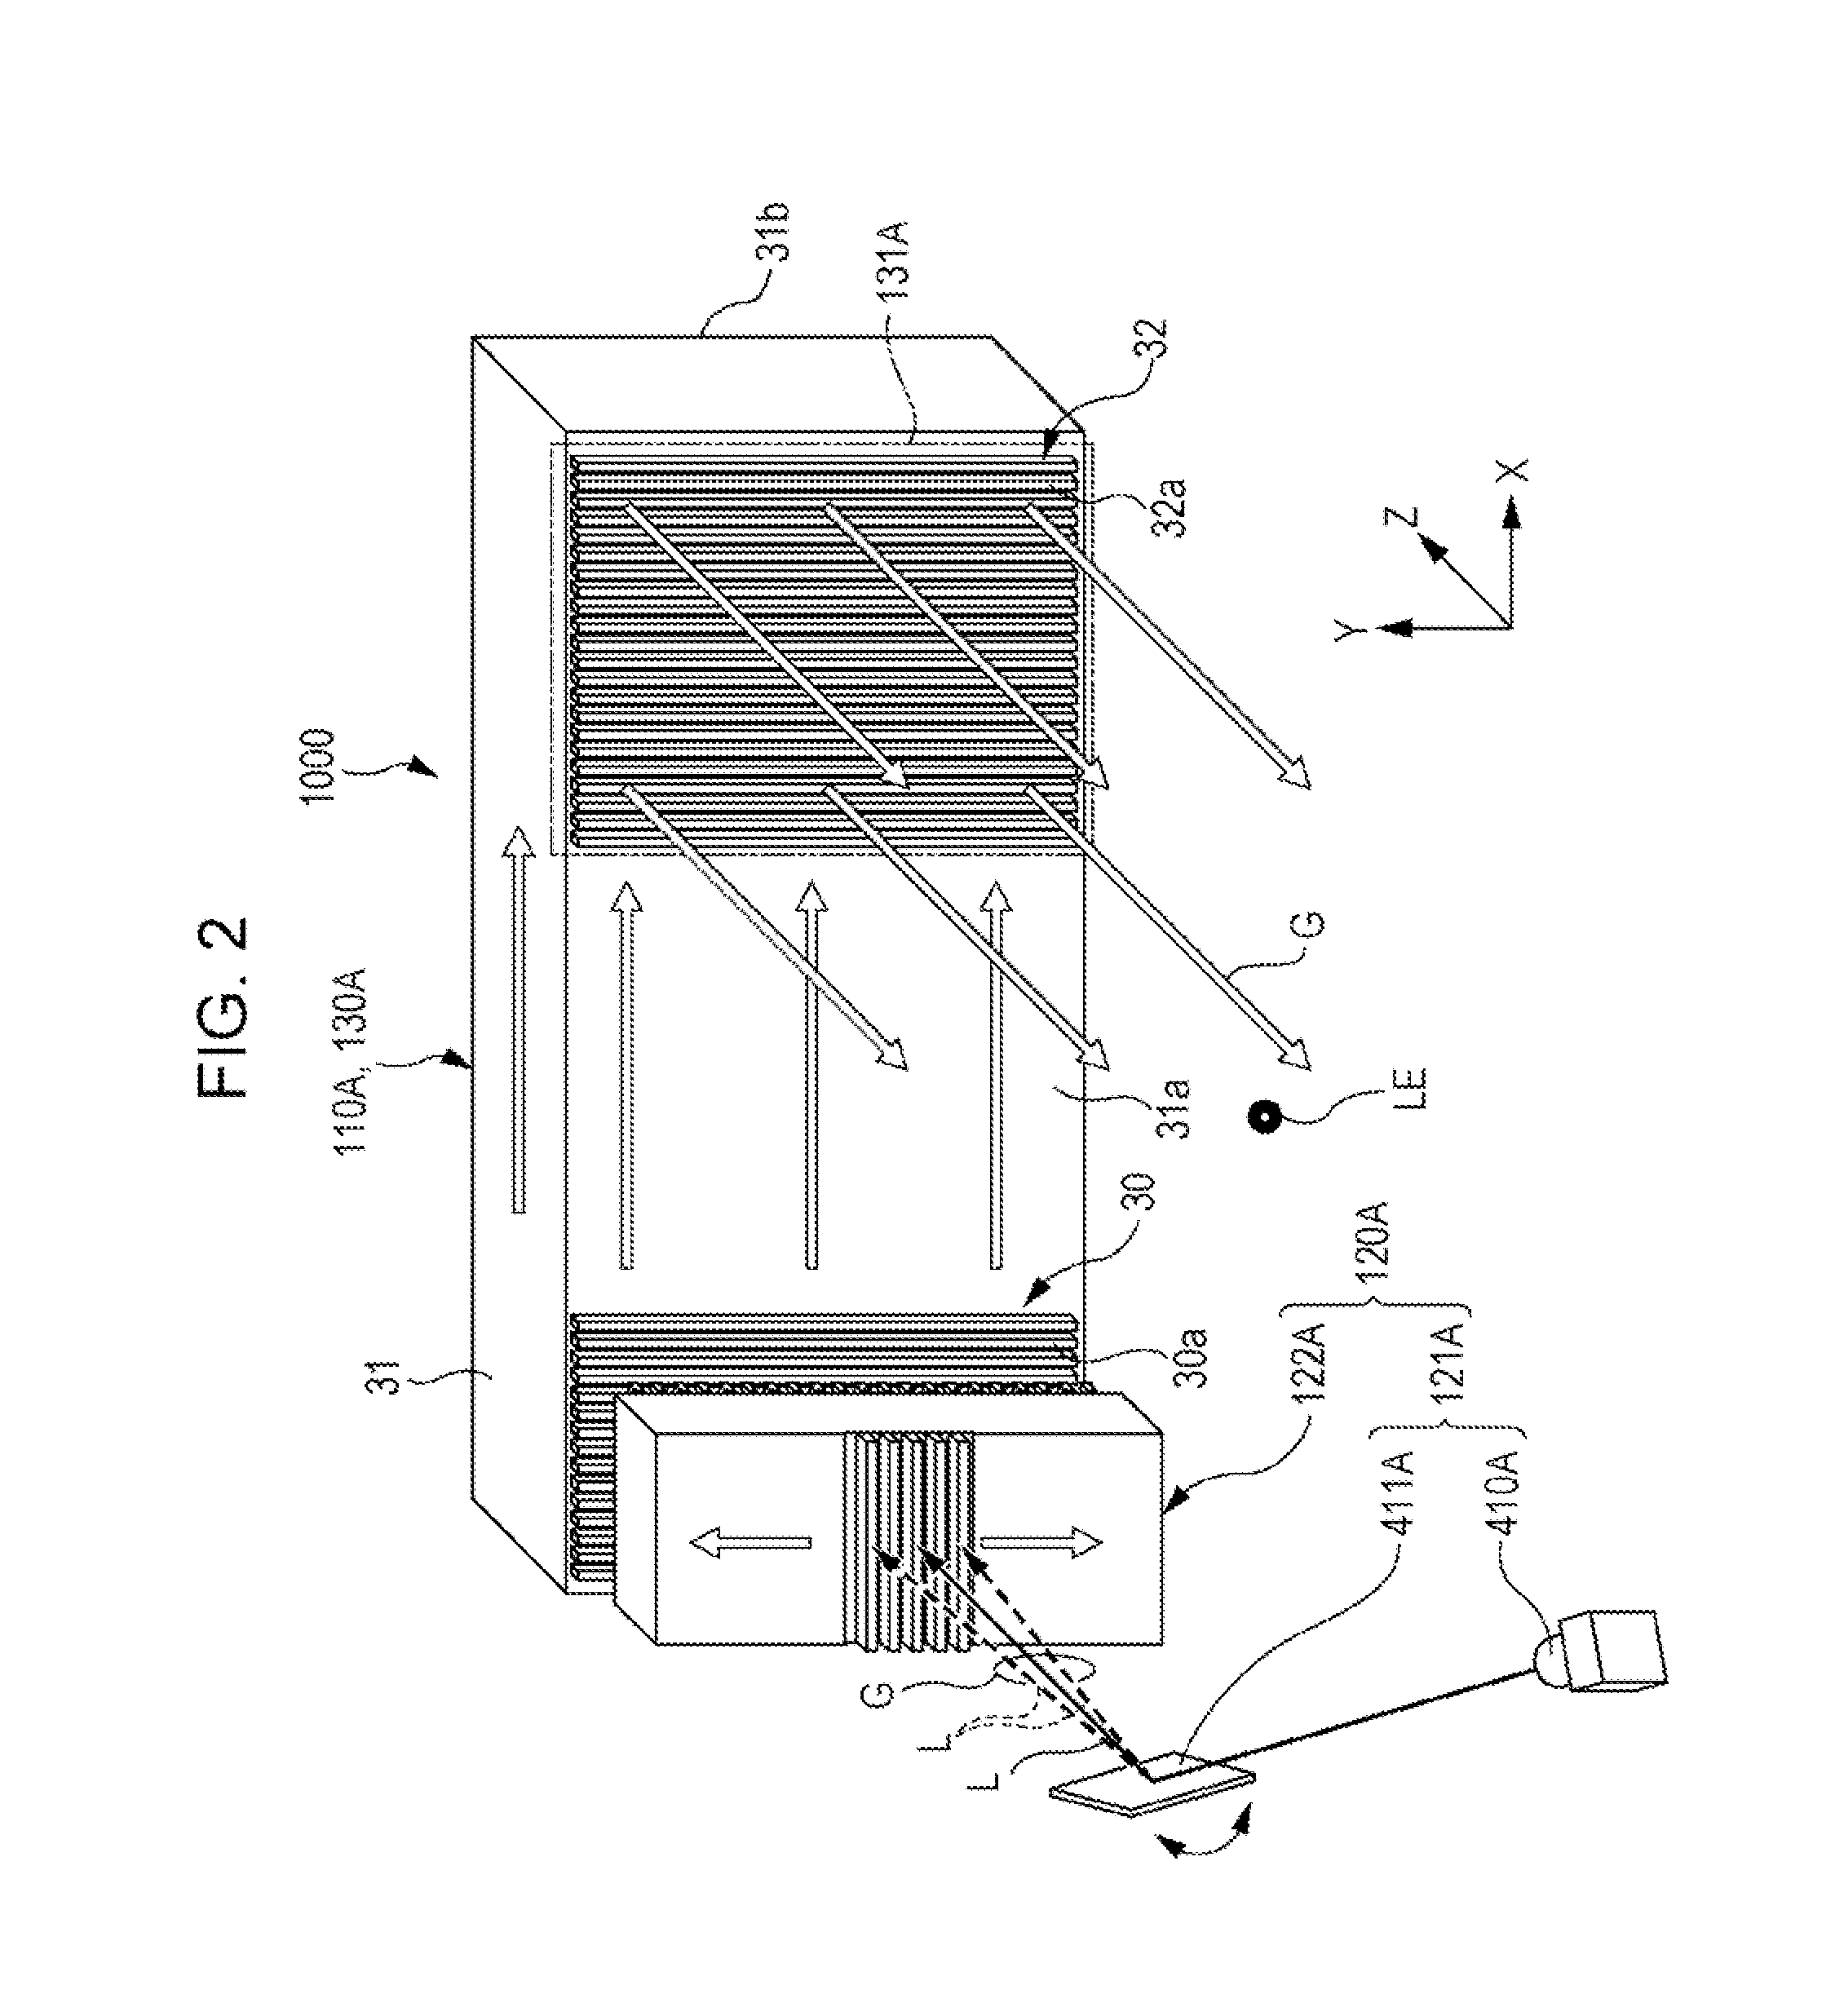 Optical element, electro-optical device, and mounted display apparatus